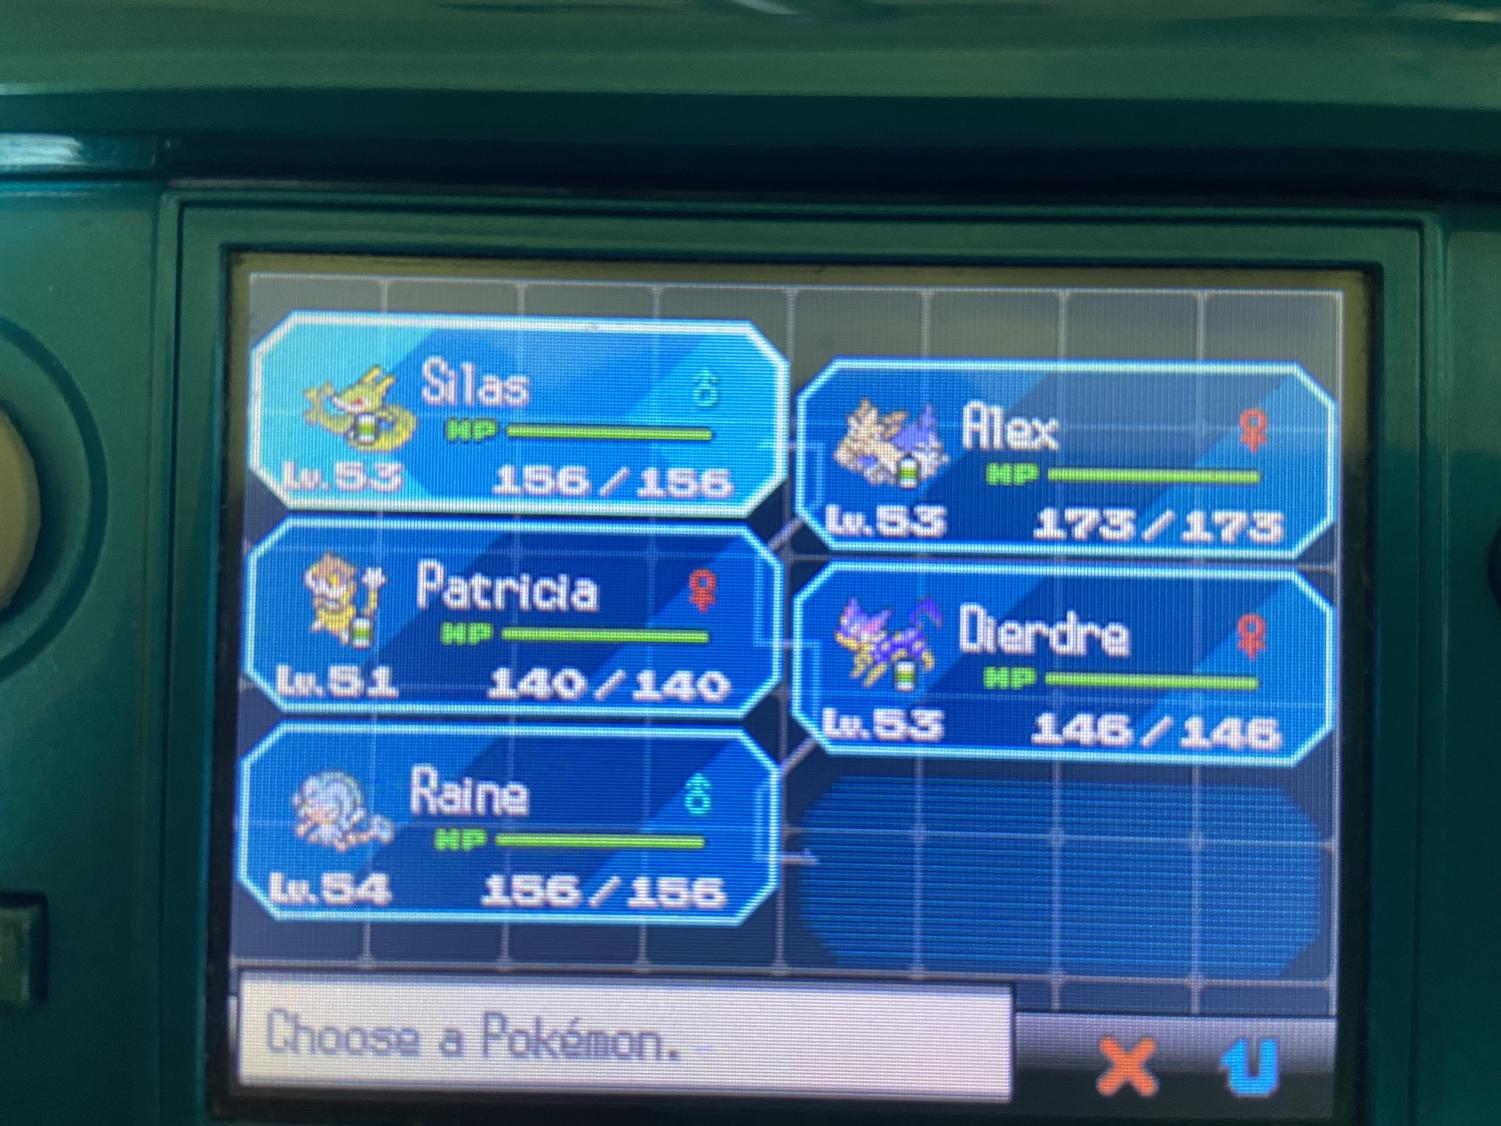 Playing a randomizer on easy mode at the Elite 4. What items